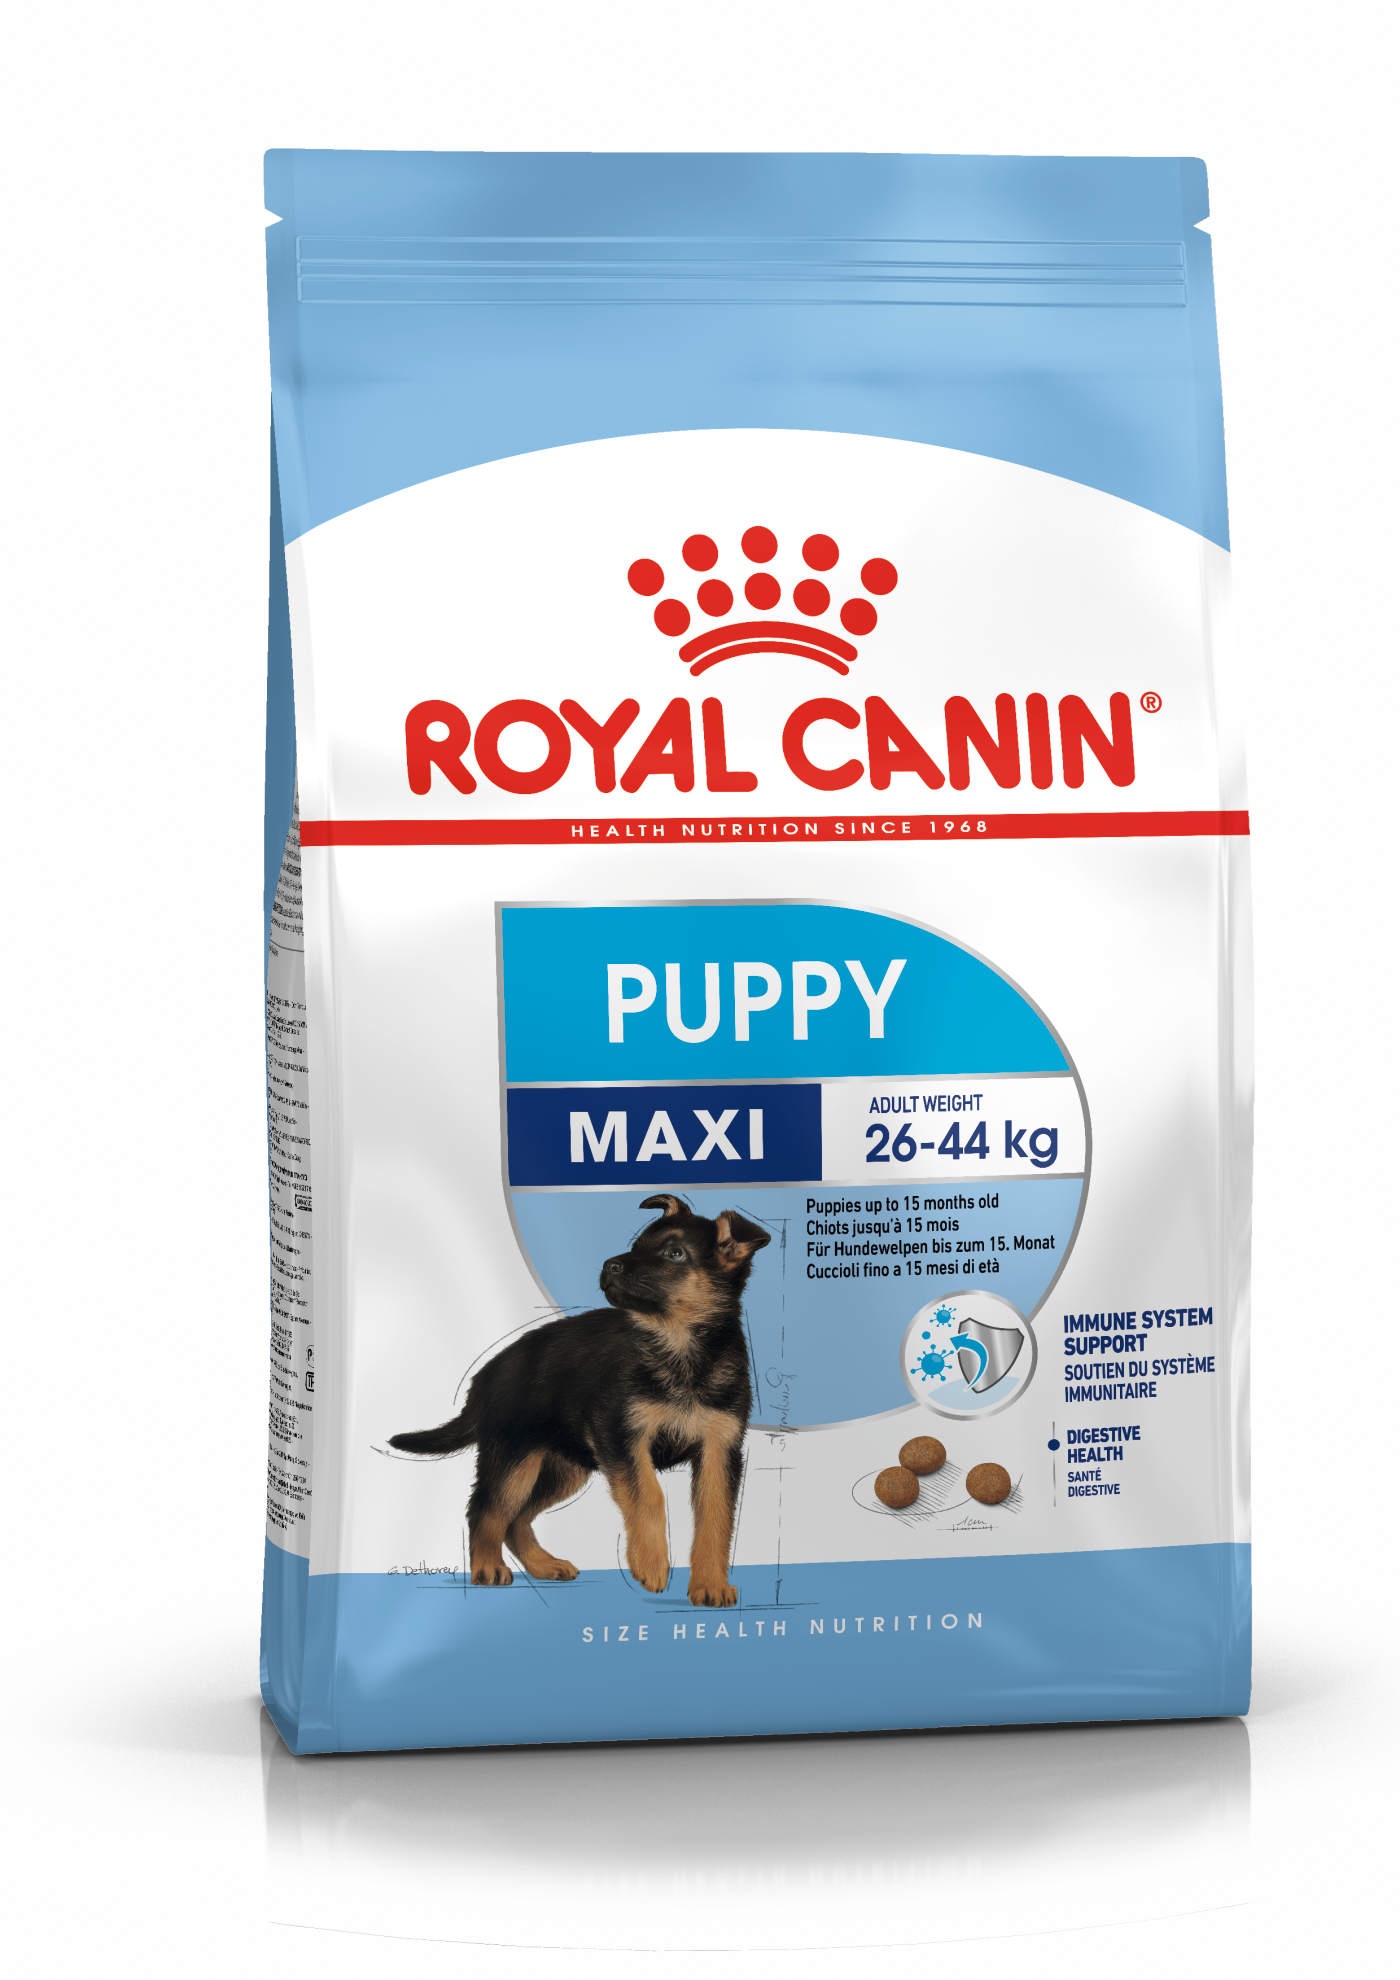 Dog Food for Puppies - Royal Canin